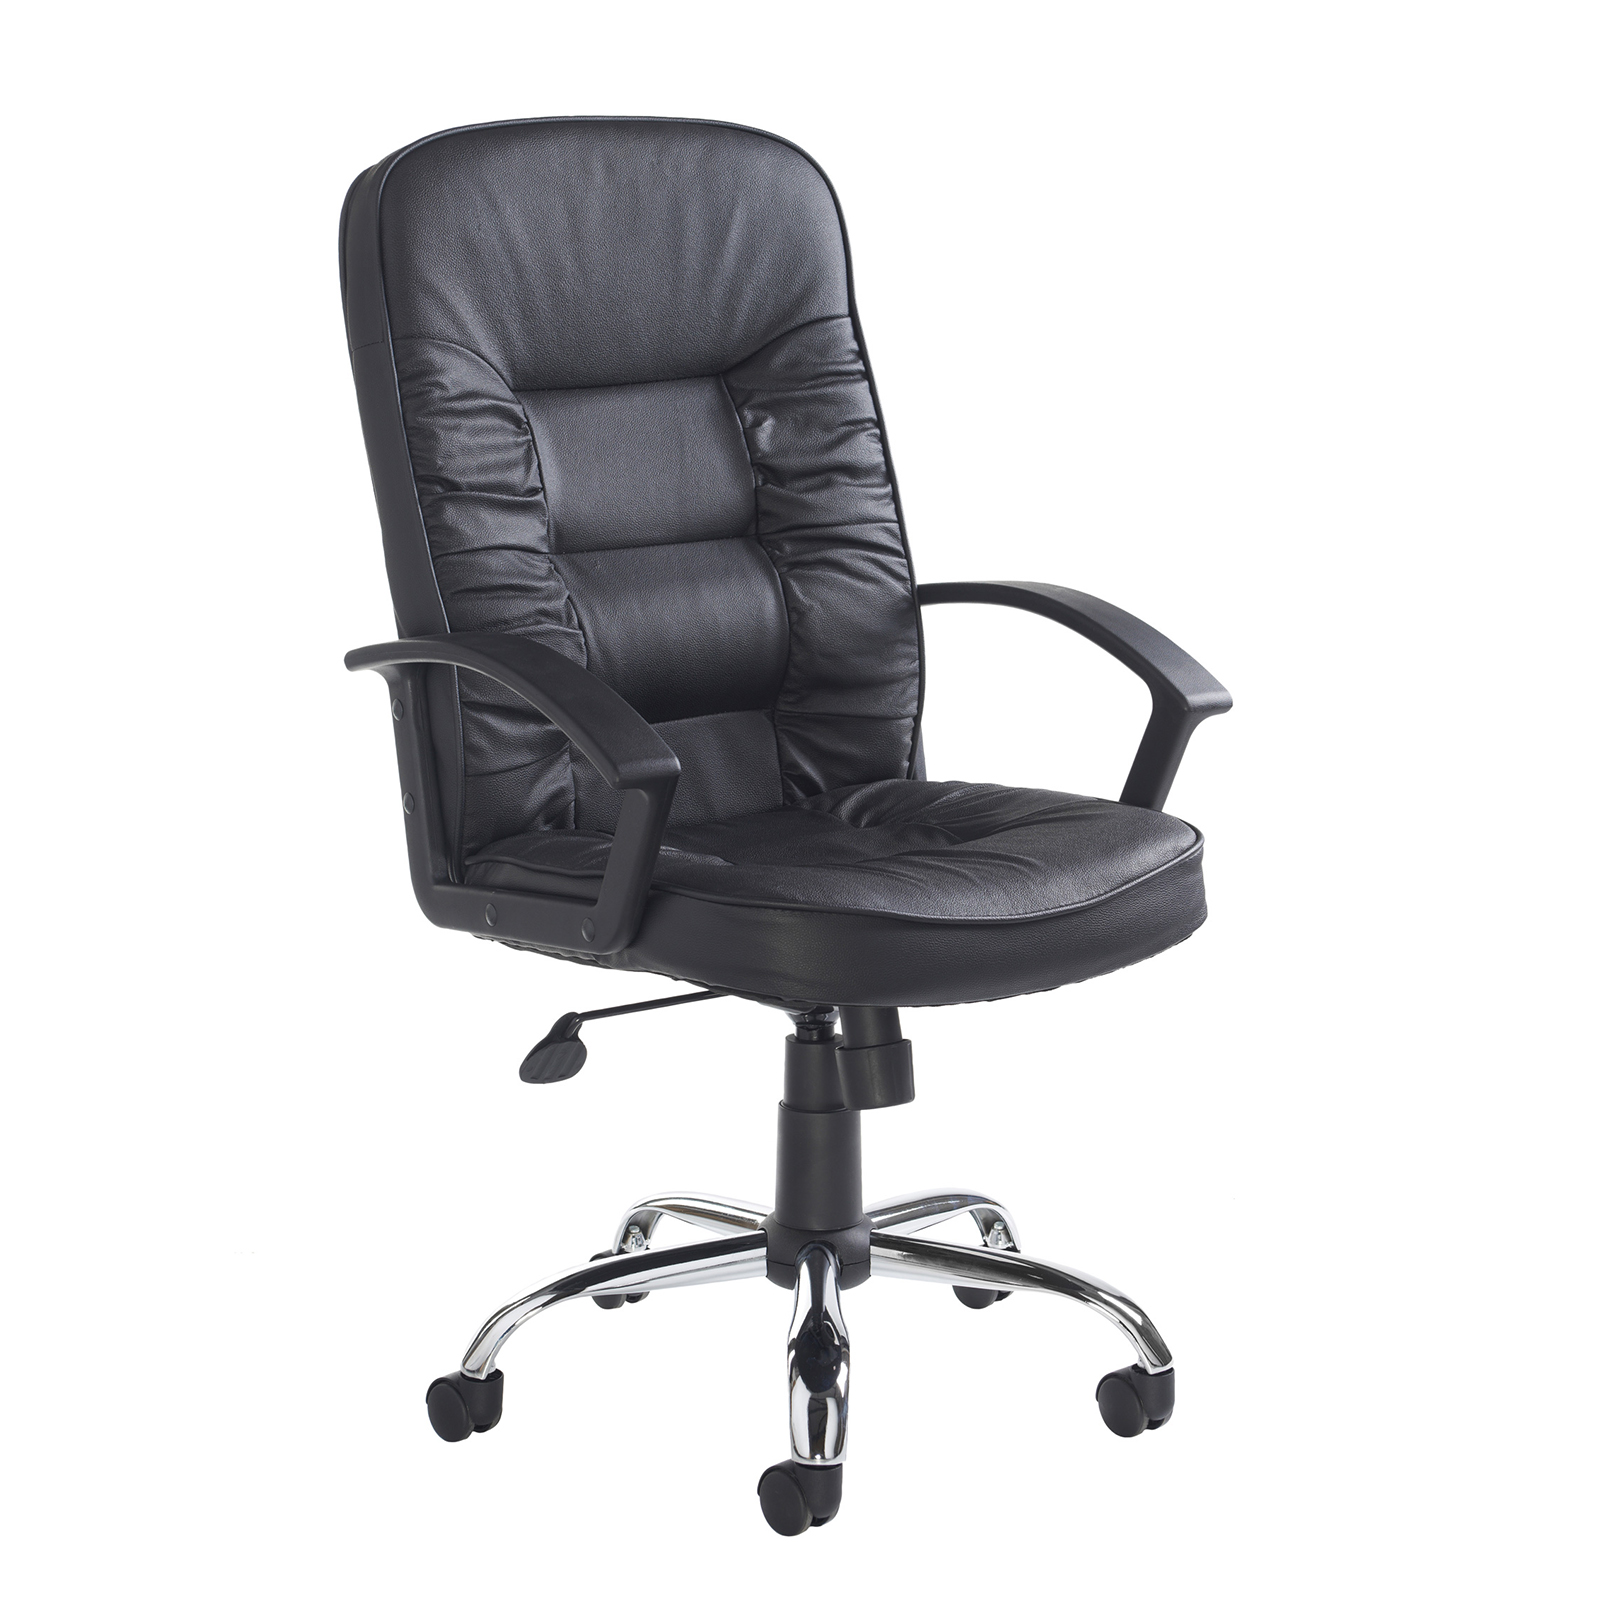 Hertford High Back Managers Chair - Black Leather Faced